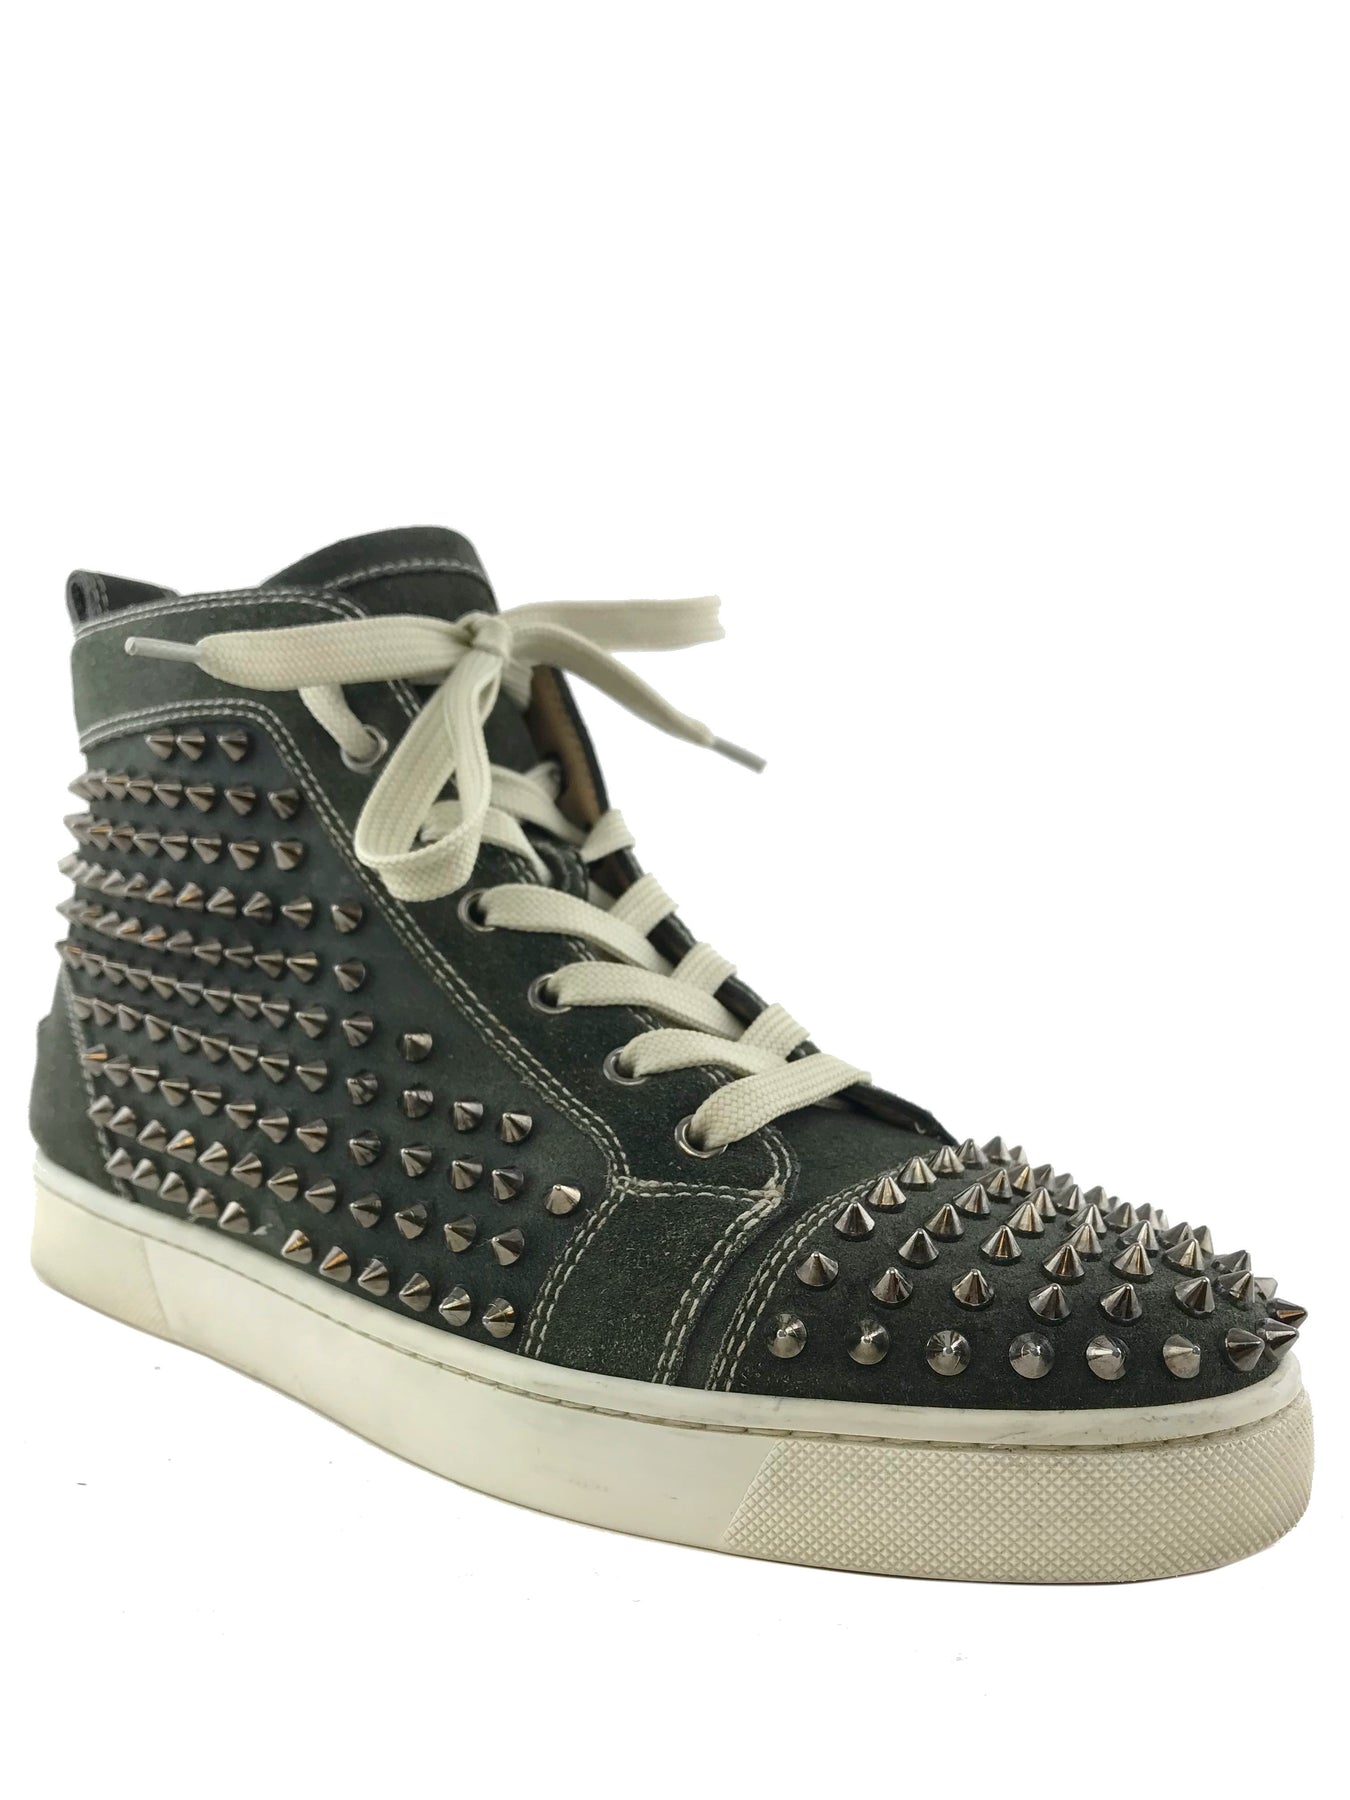 Christian Louboutin Lou Spikes Suede Sneakers